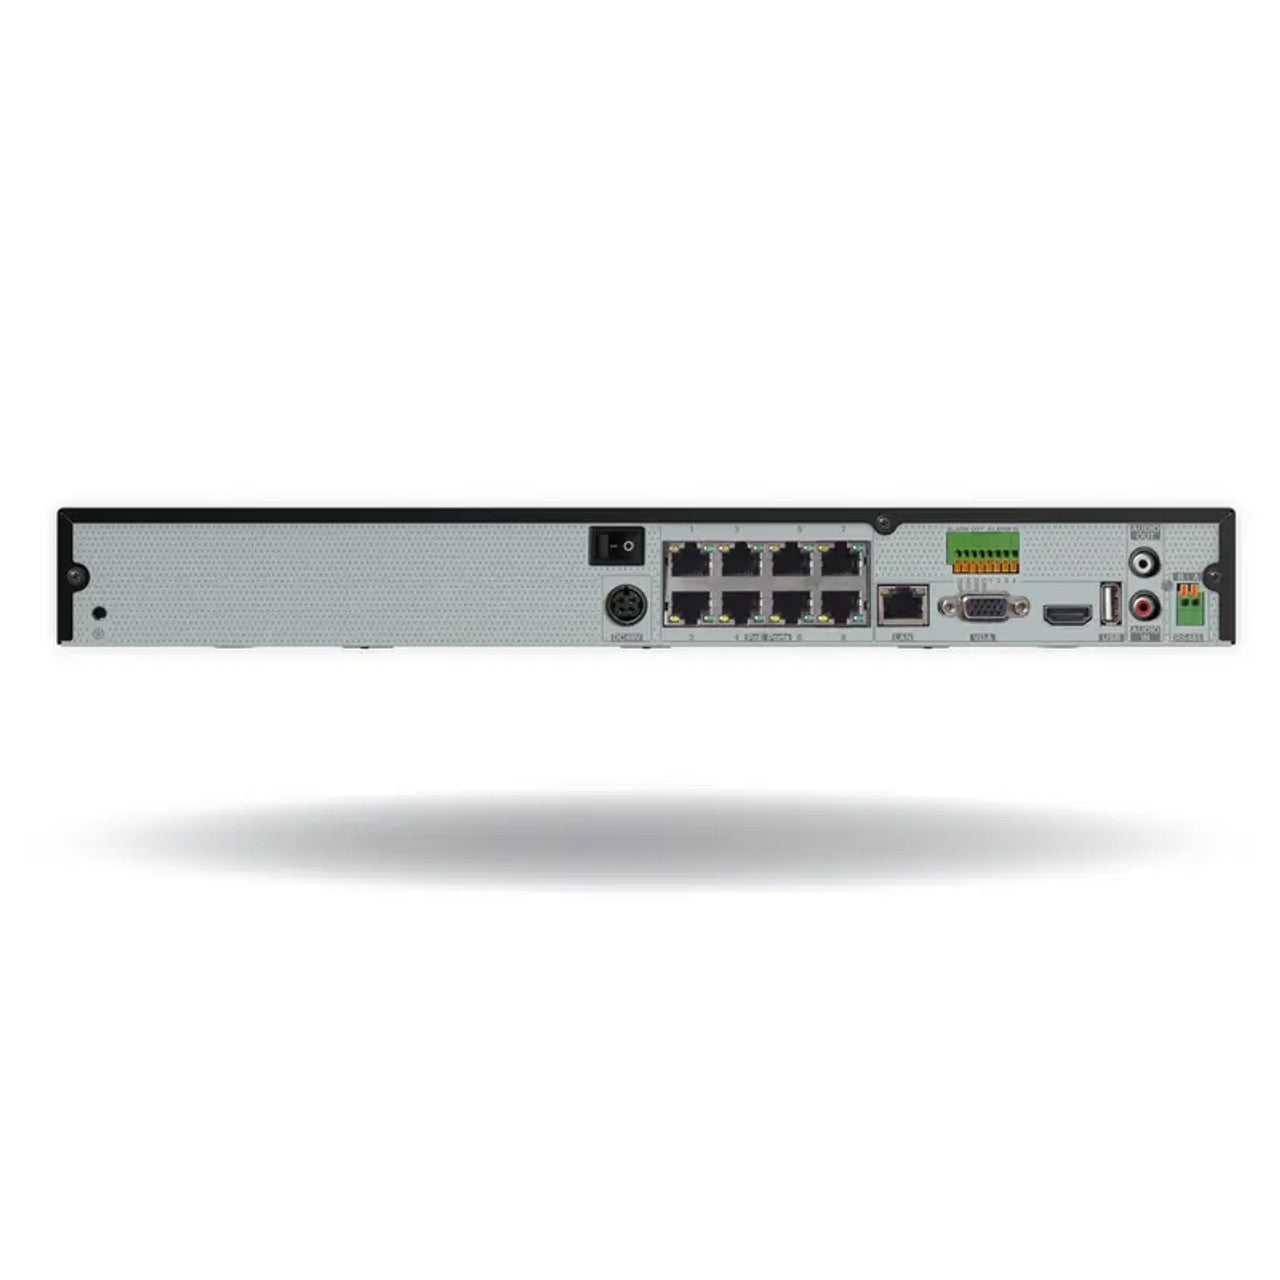 Digital Watchdog DW-VG41210T8P VMAX IP G4 8 Channel PoE NVR with 4 bonus channels with 10TB Hard Drive, 12-Channel